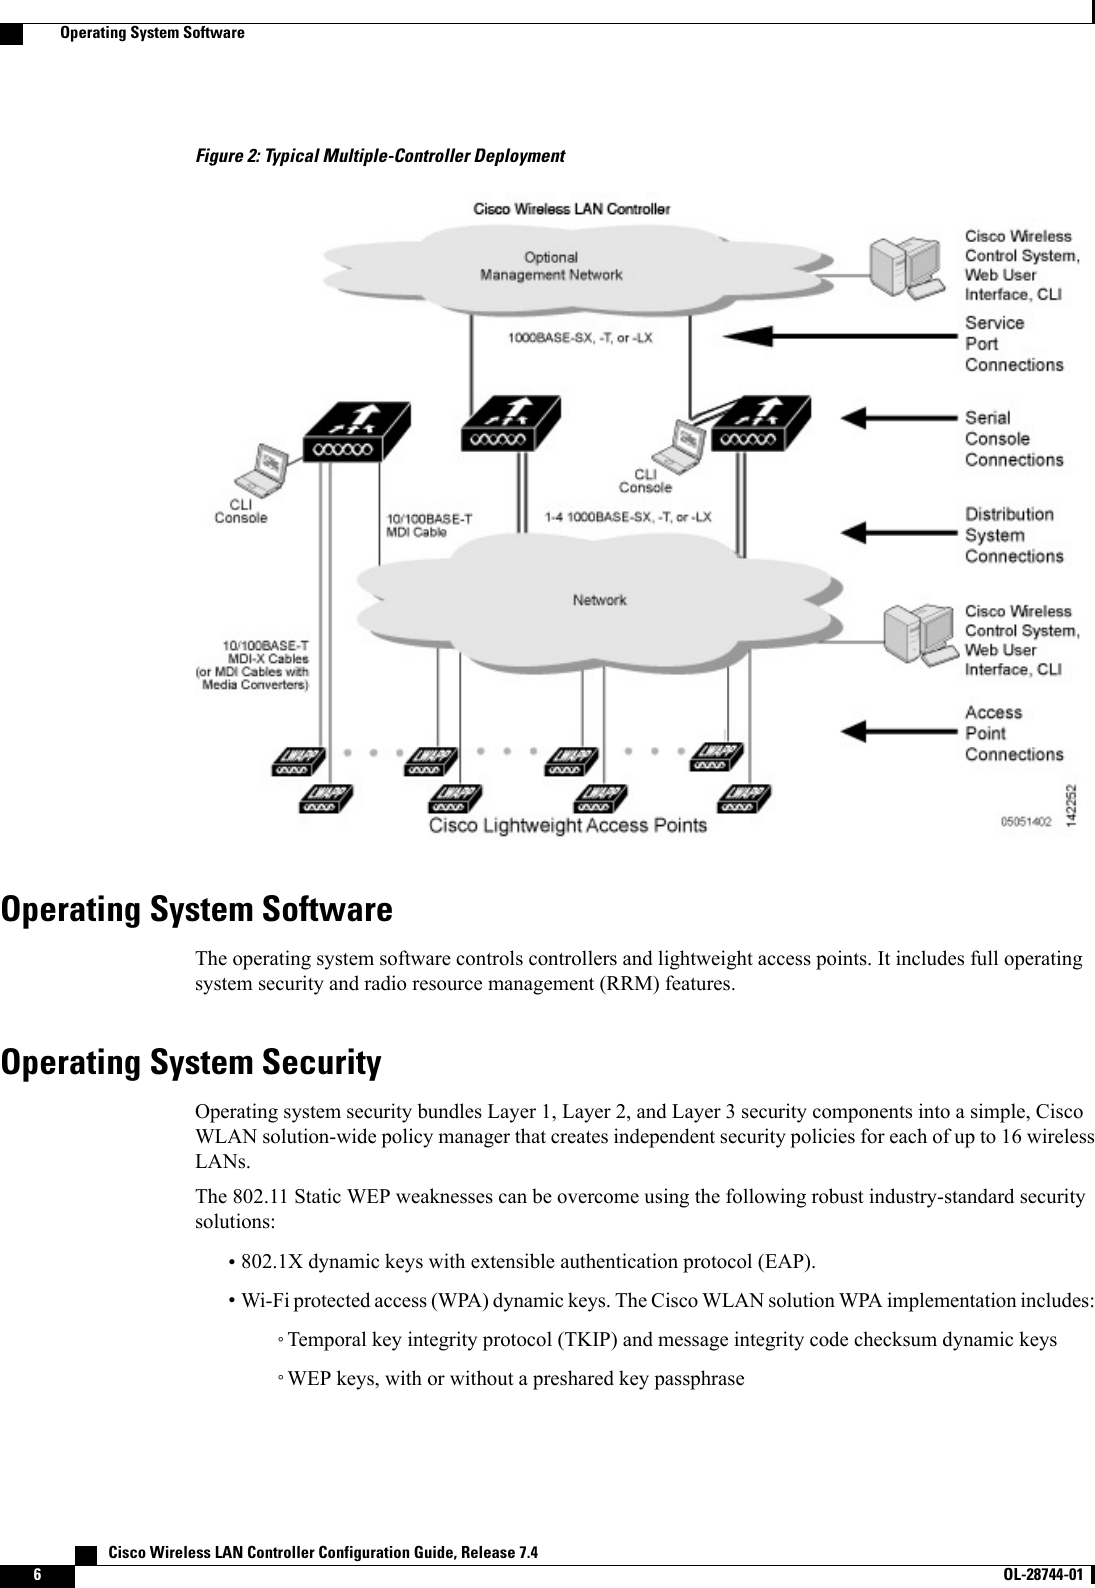 Figure 2: Typical Multiple-Controller DeploymentOperating System SoftwareThe operating system software controls controllers and lightweight access points. It includes full operatingsystem security and radio resource management (RRM) features.Operating System SecurityOperating system security bundles Layer 1, Layer 2, and Layer 3 security components into a simple, CiscoWLAN solution-wide policy manager that creates independent security policies for each of up to 16 wirelessLANs.The 802.11 Static WEP weaknesses can be overcome using the following robust industry-standard securitysolutions:•802.1X dynamic keys with extensible authentication protocol (EAP).•Wi-Fi protected access (WPA) dynamic keys. The Cisco WLAN solution WPA implementation includes:◦Temporal key integrity protocol (TKIP) and message integrity code checksum dynamic keys◦WEP keys, with or without a preshared key passphrase   Cisco Wireless LAN Controller Configuration Guide, Release 7.46OL-28744-01  Operating System Software